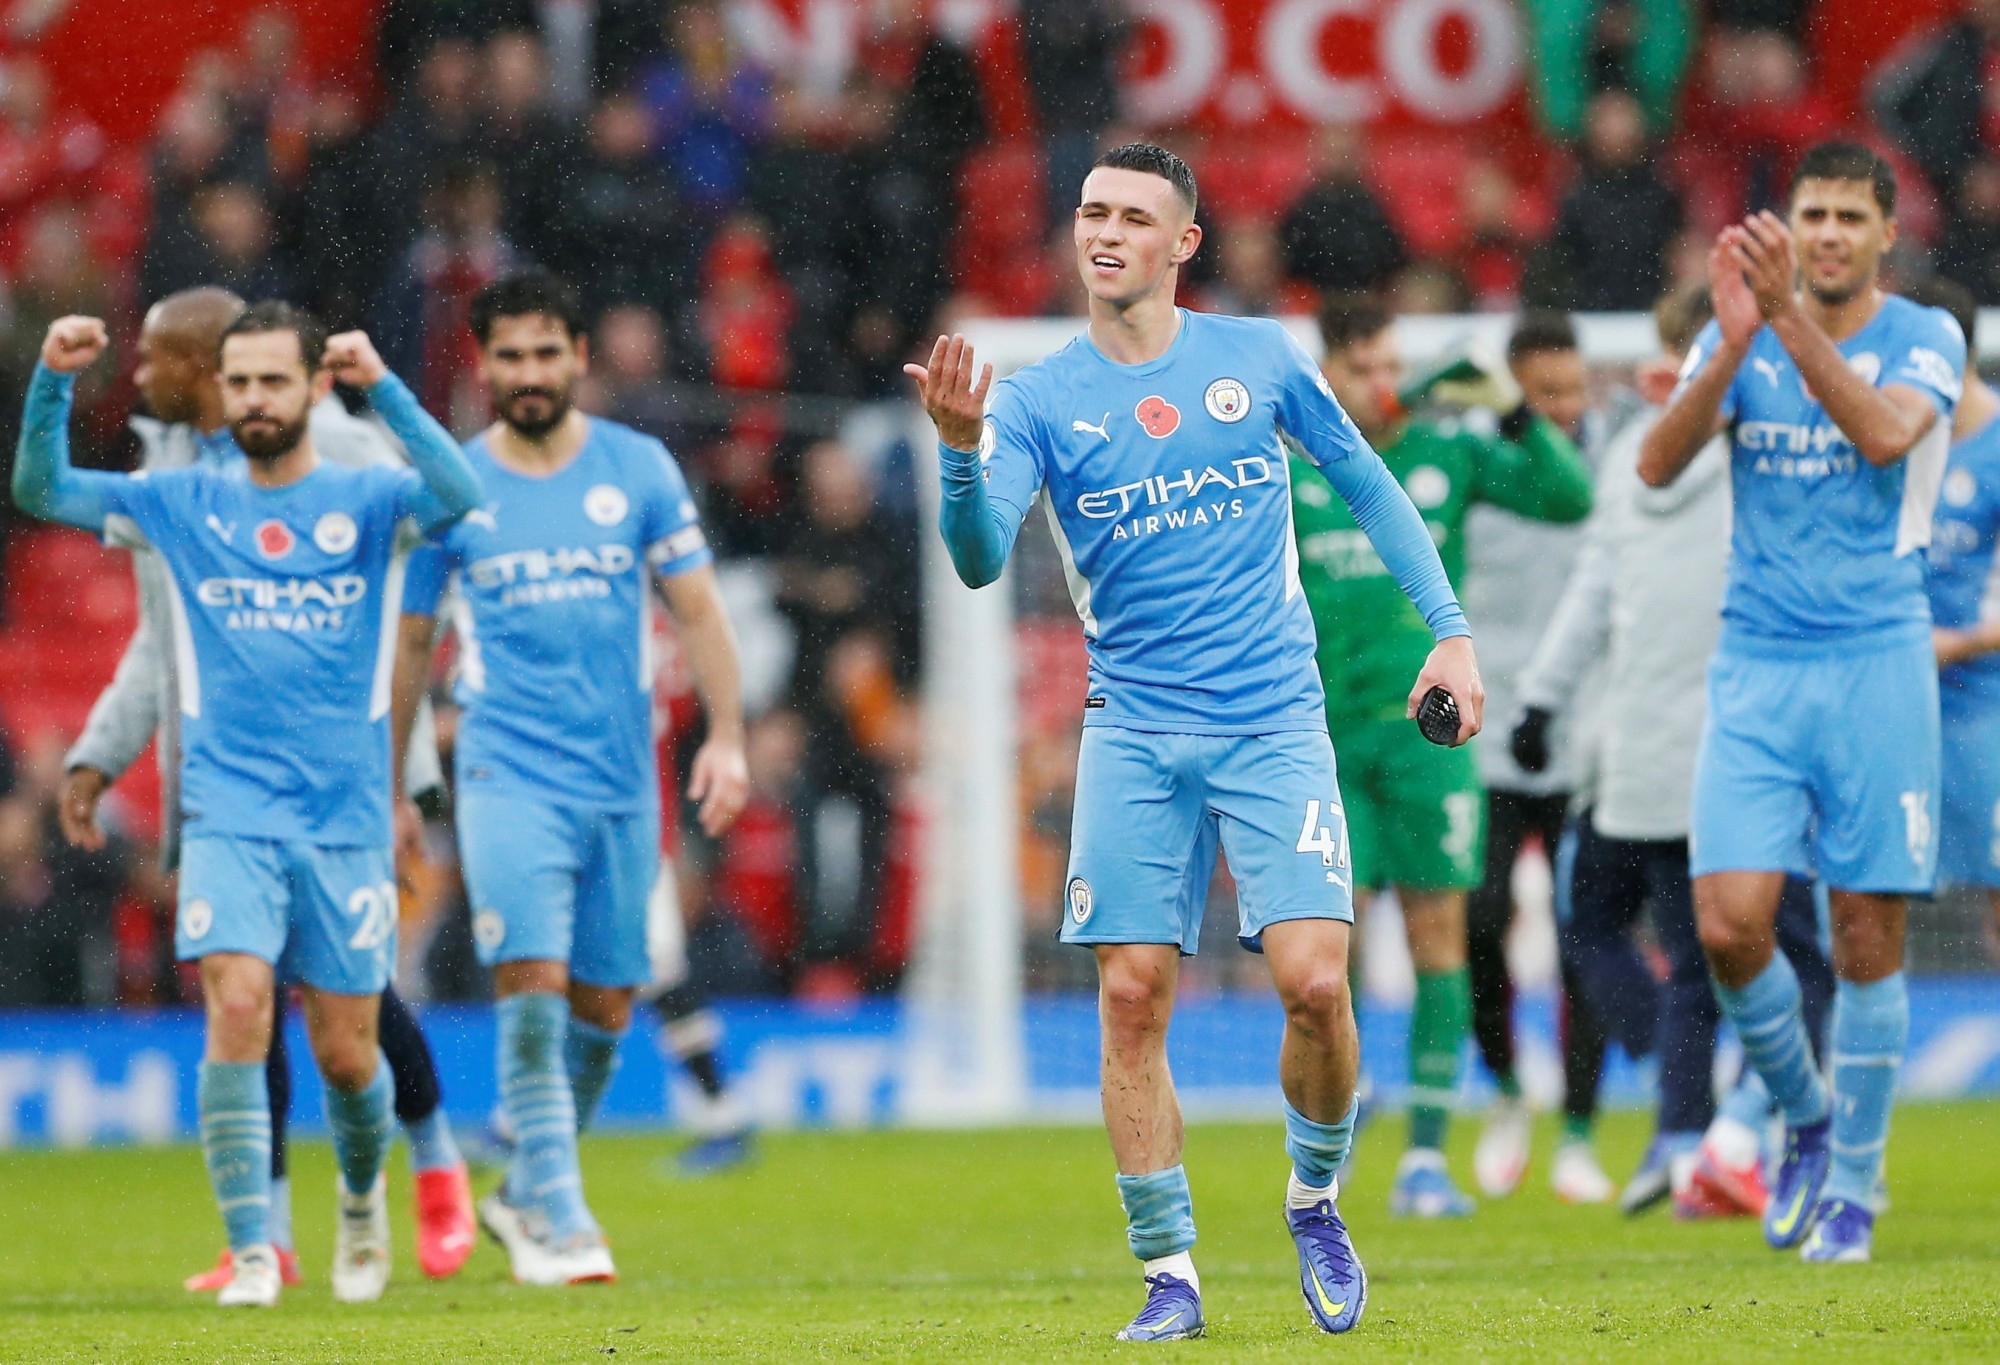 Man City cruise to derby win as United home woes continue